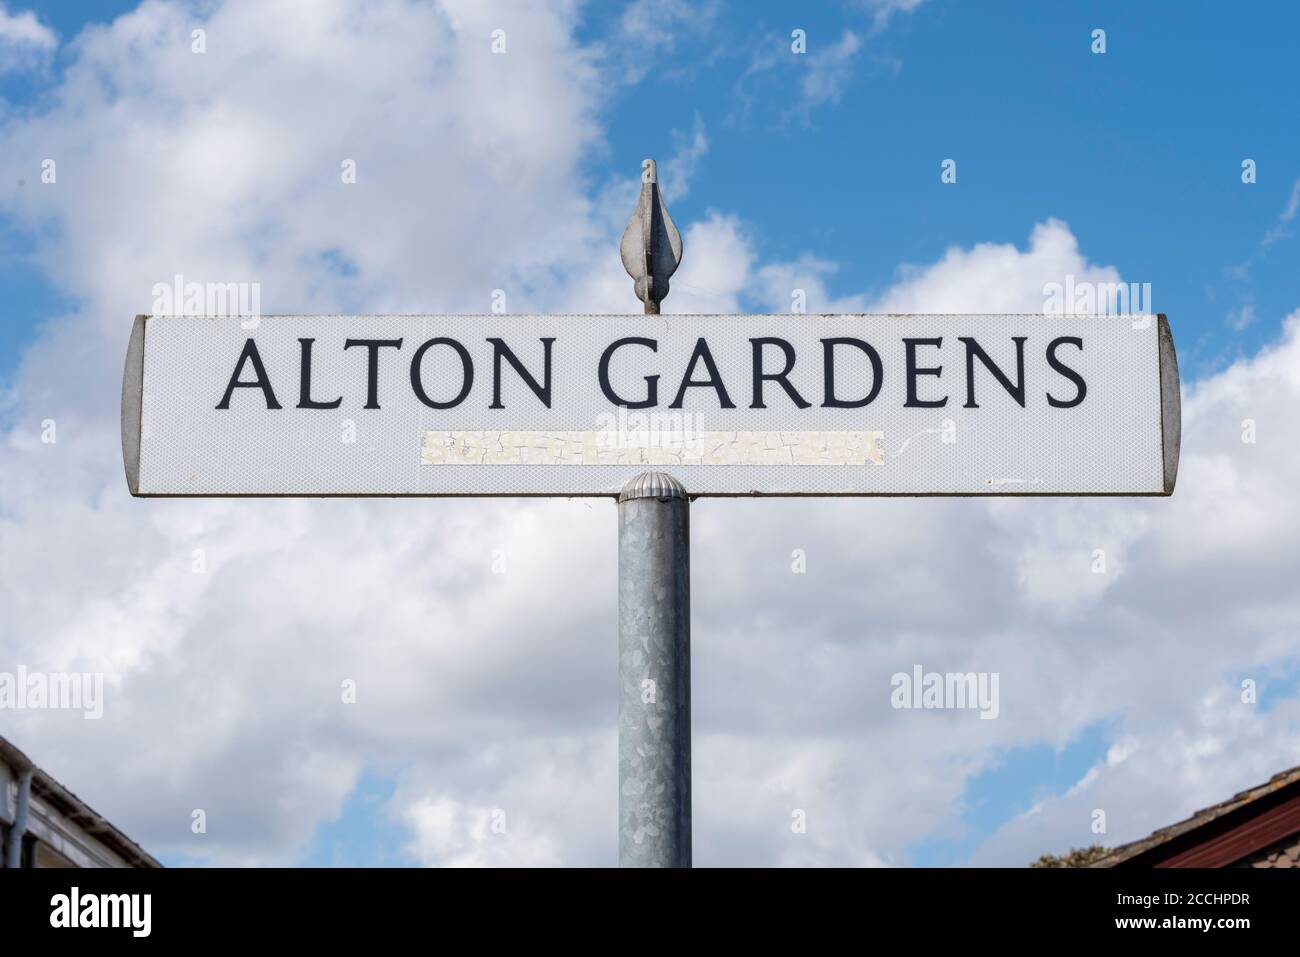 Alton Gardens signpost in Southend on Sea, Essex, UK. Road sign, street sign Stock Photo